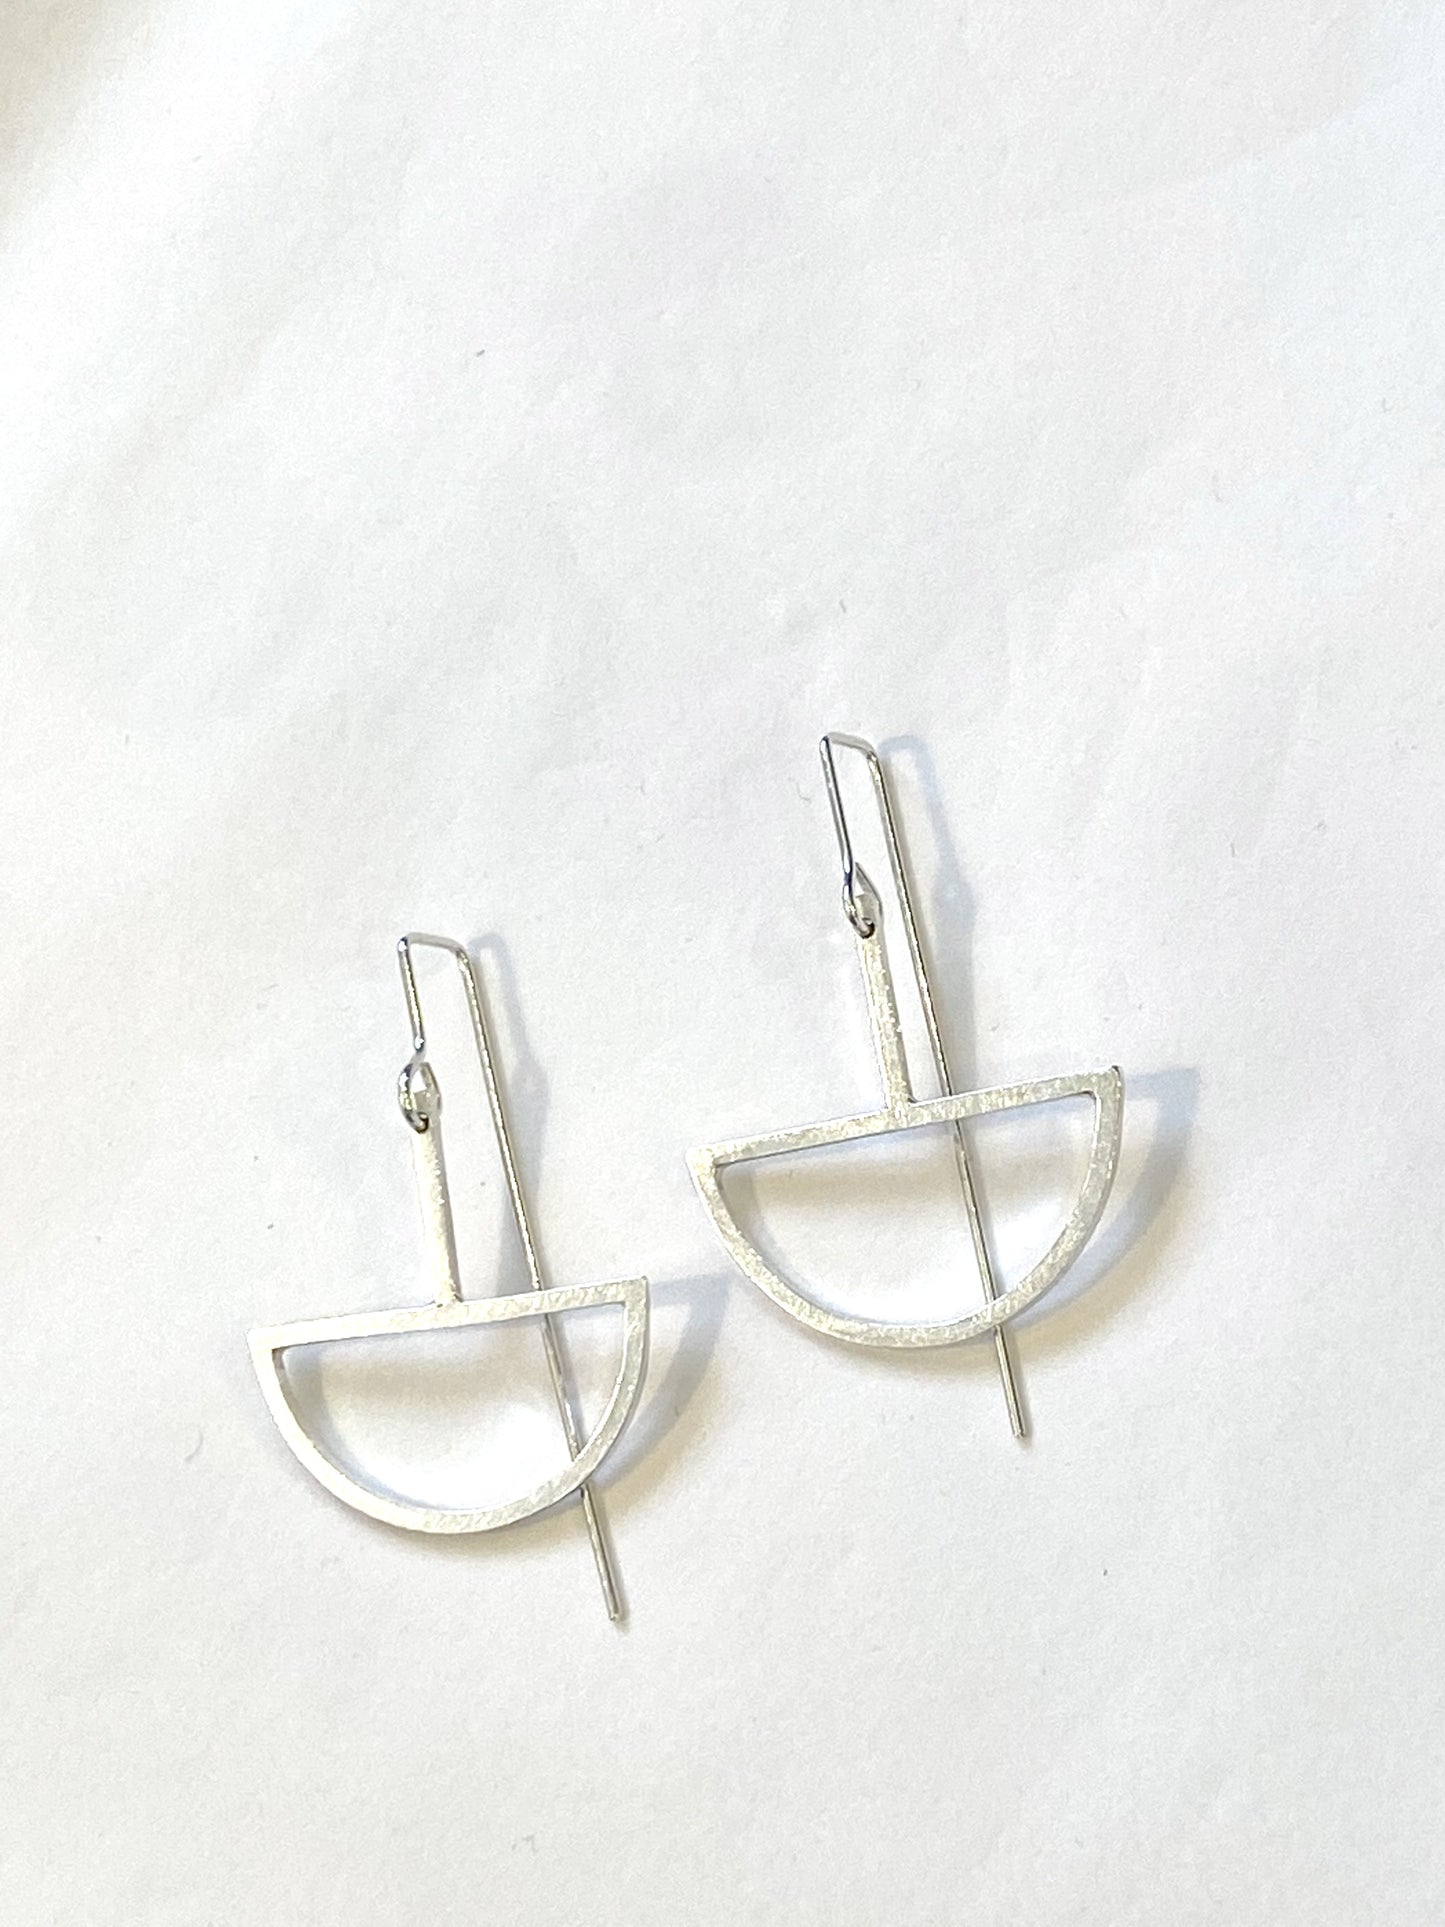 Stg Silver Crescent with Bar Earrings (#141)